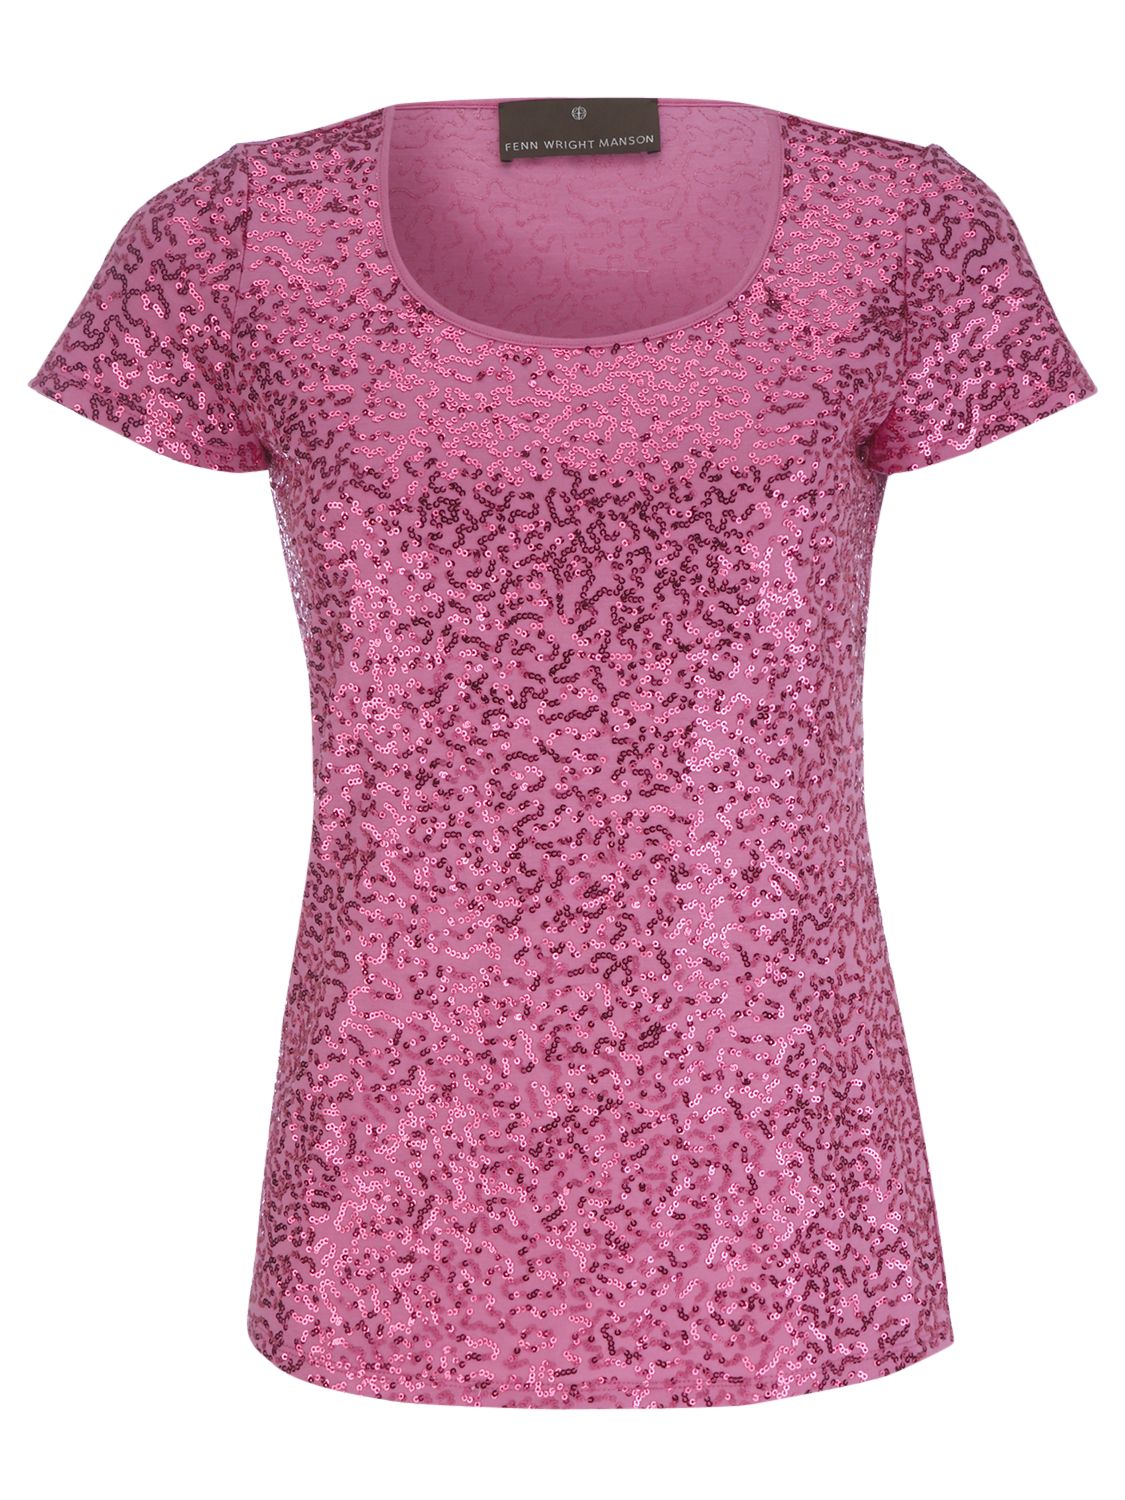 Sequined T-Shirt, Hot Pink